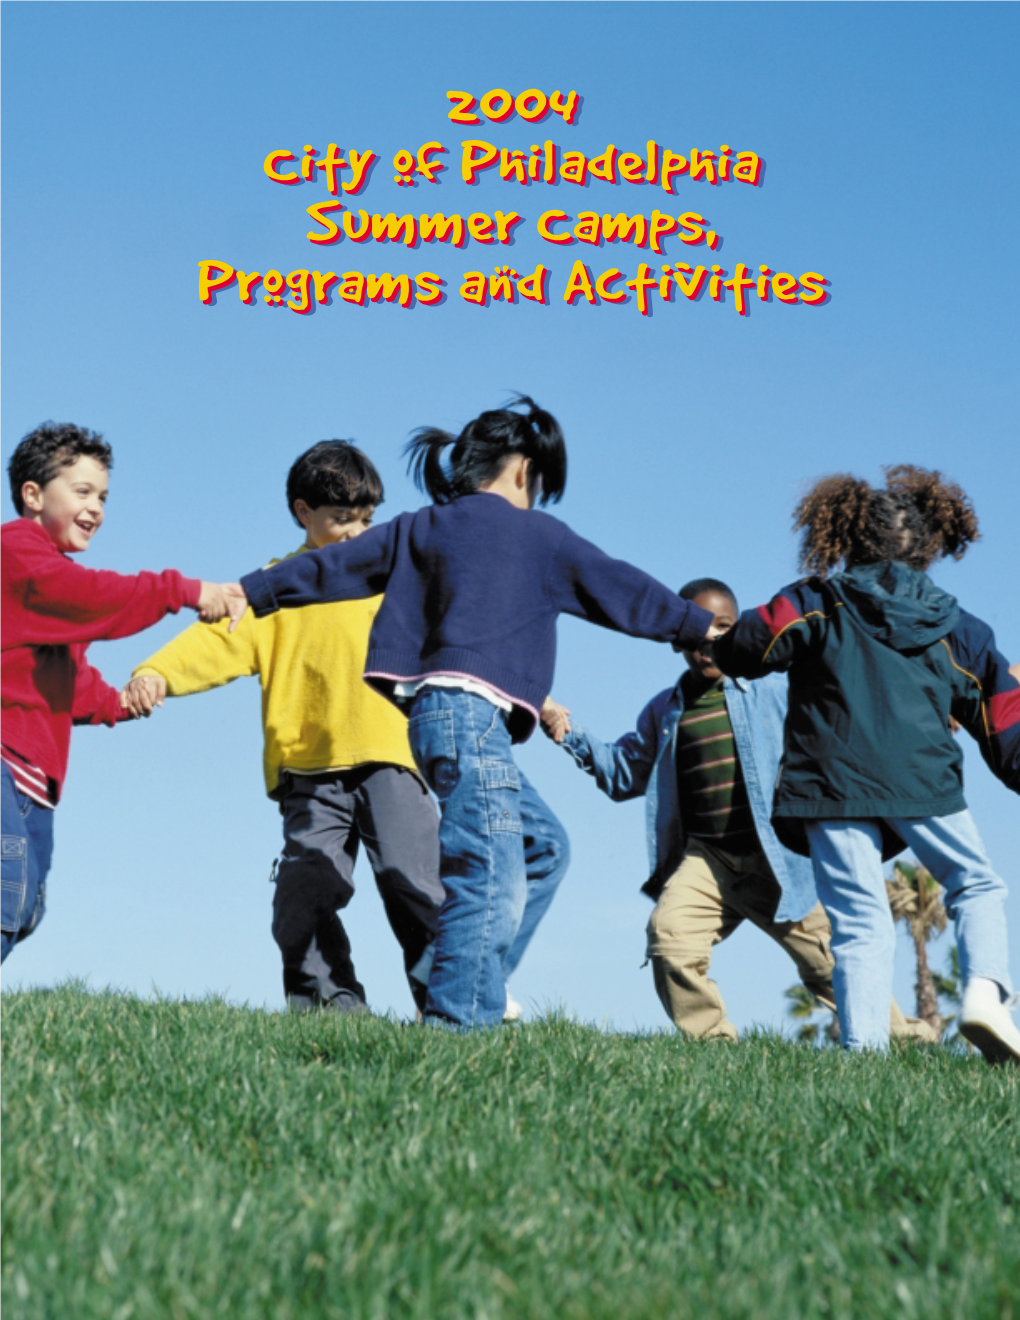 2004 City of Philadelphia Summer Camps, Programs and Activities